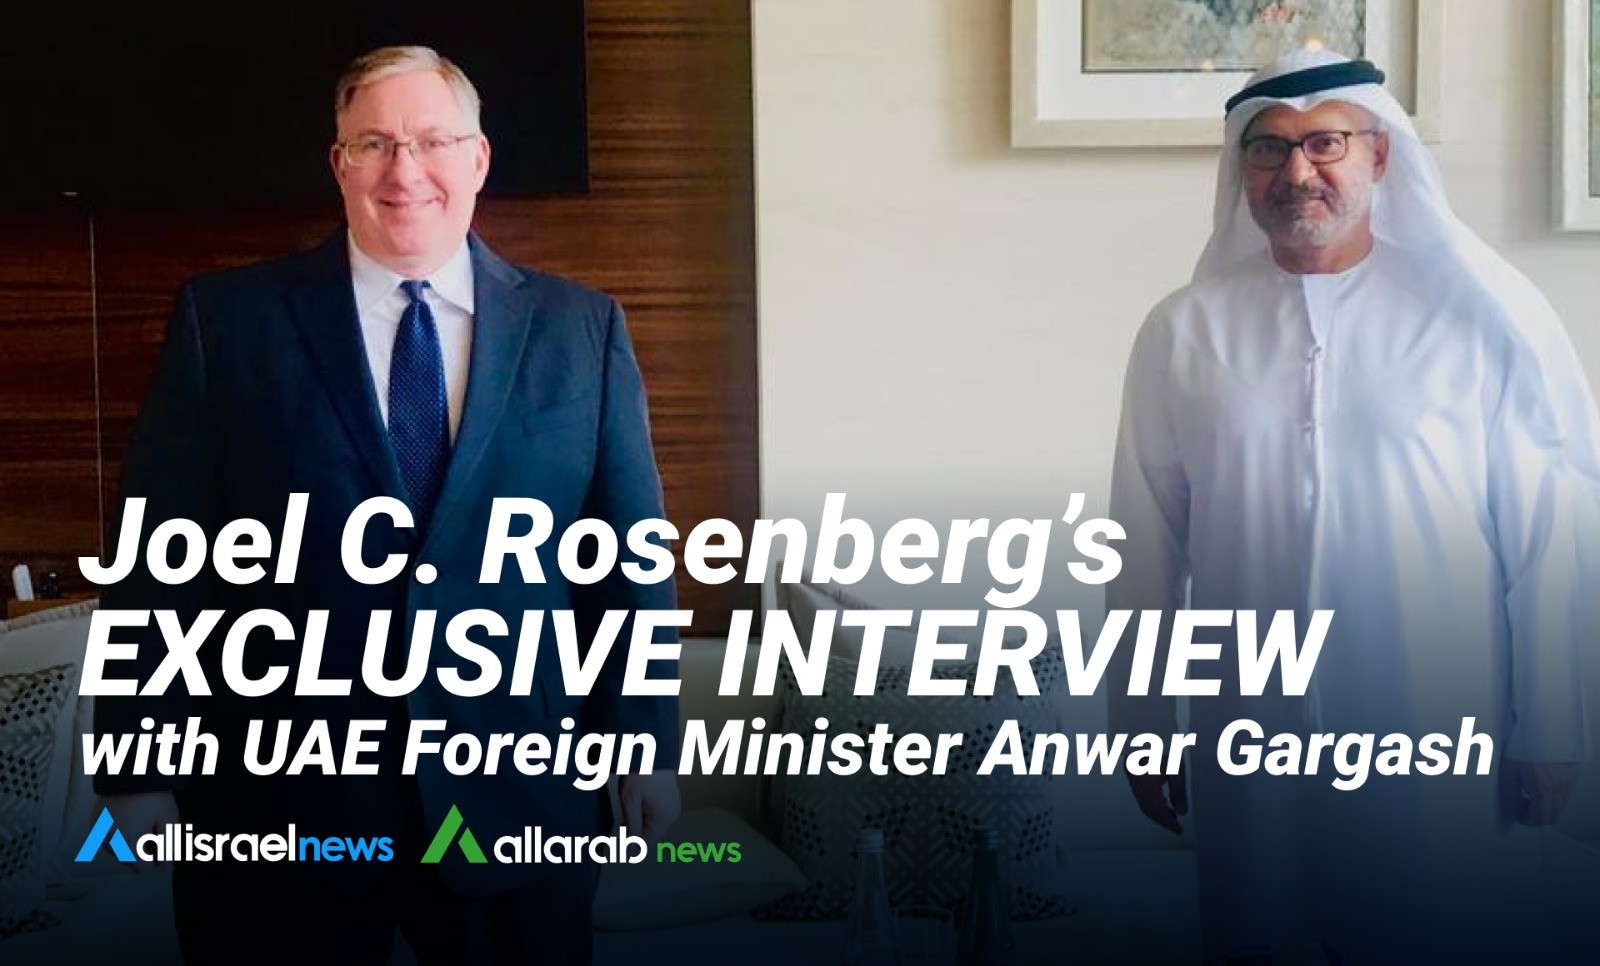 https://www.allisrael.com/uae-wants-more-than-trade-with-israel-it-wants-to-create-new-model-of-peace-prosperity-stability-for-a-new-middle-east-says-uae-foreign-minister